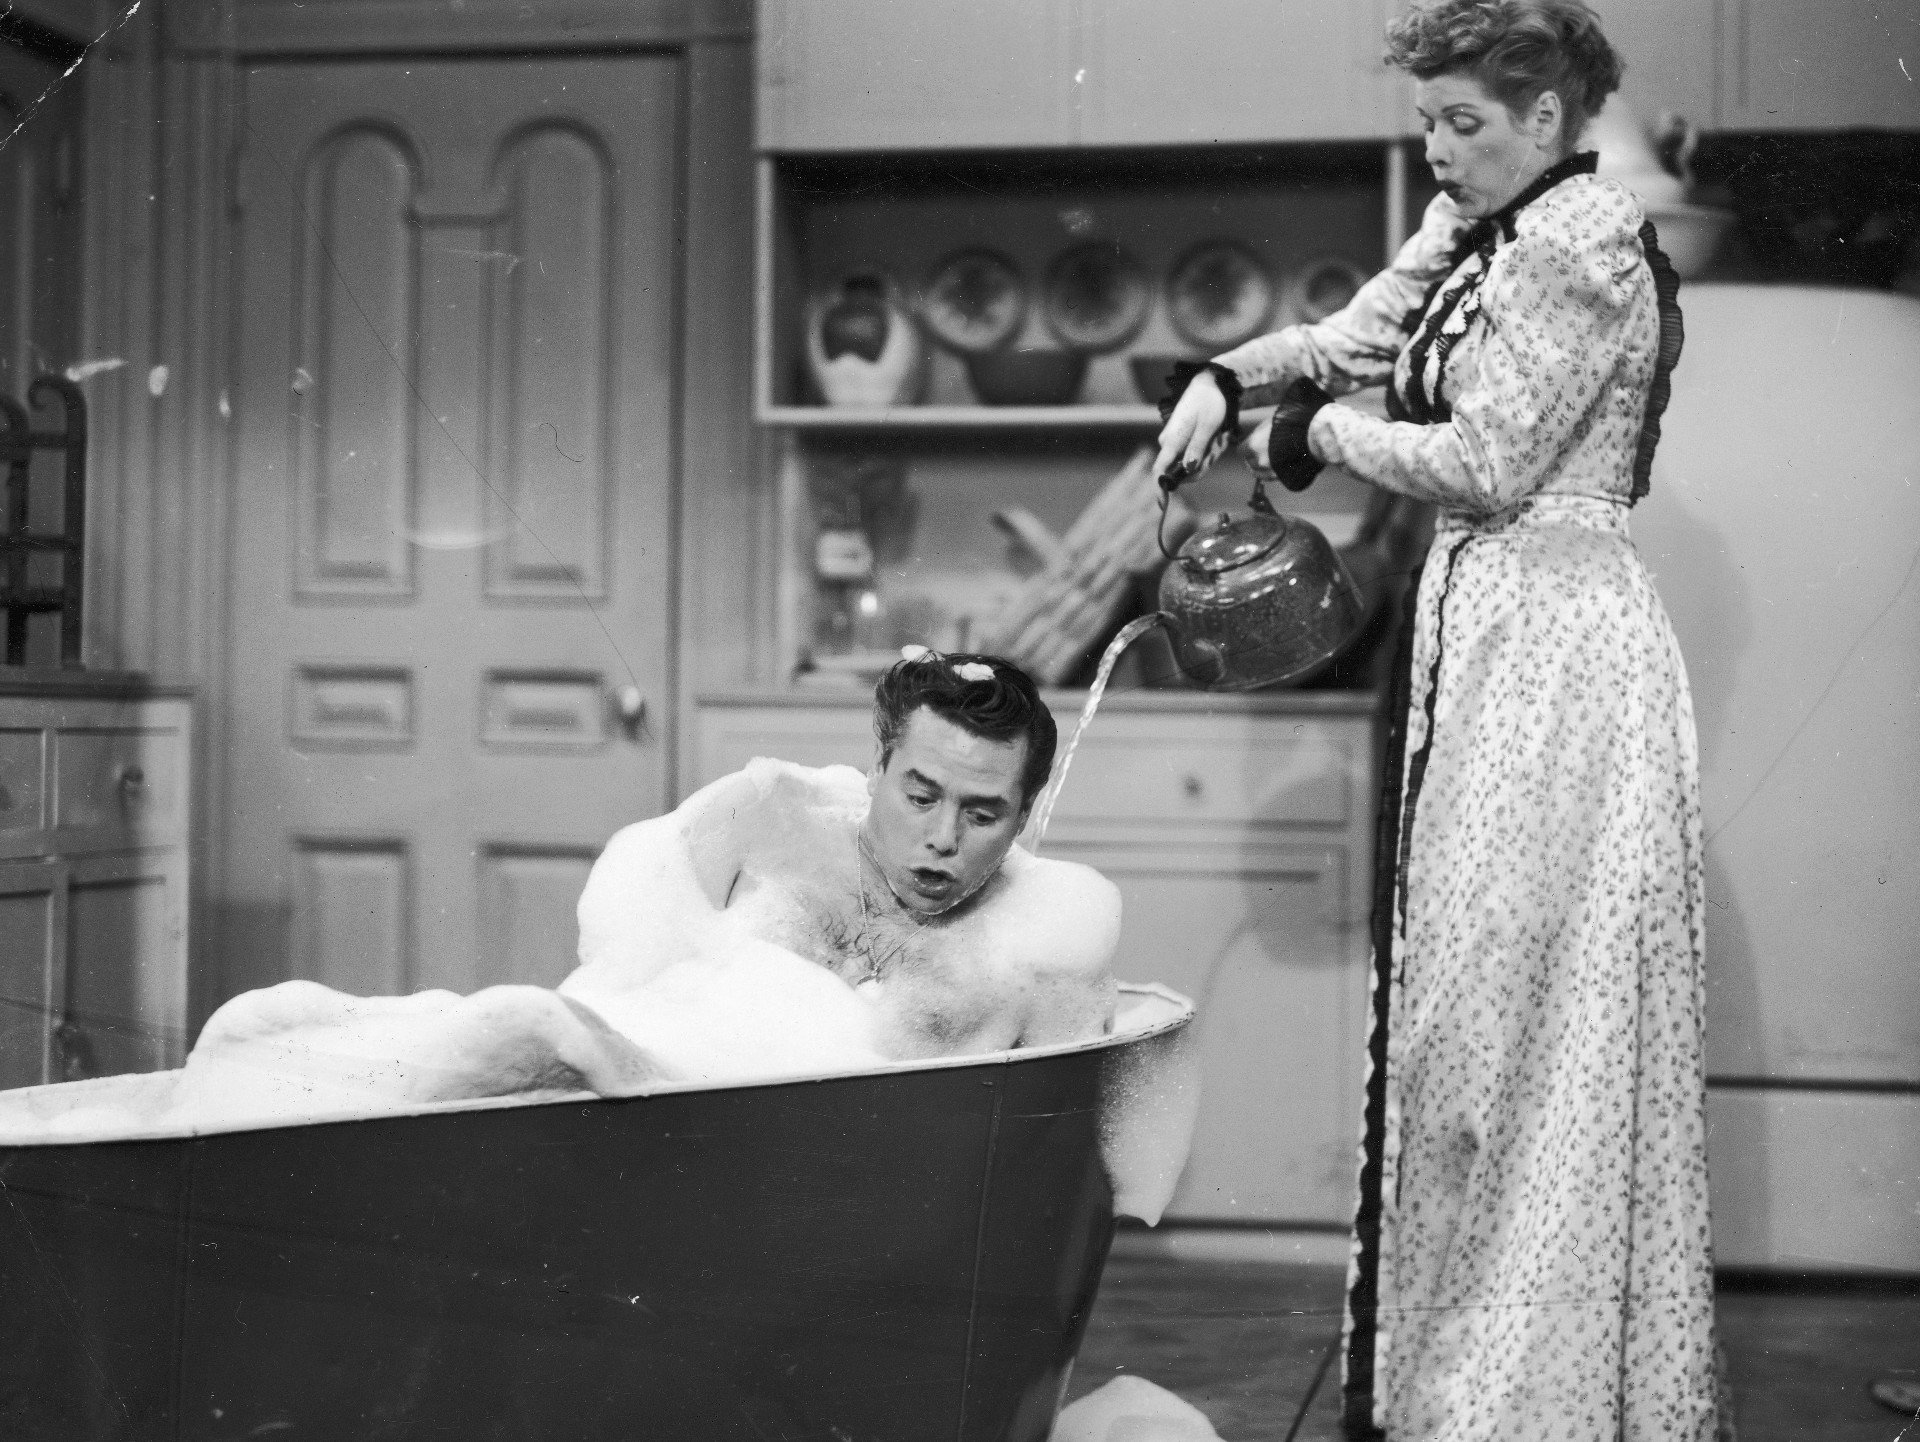 Desi Arnaz and Lucille Ball together as Lucille Ball pours a tea kettle with water over Desi Arnaz in a soapy bathtub